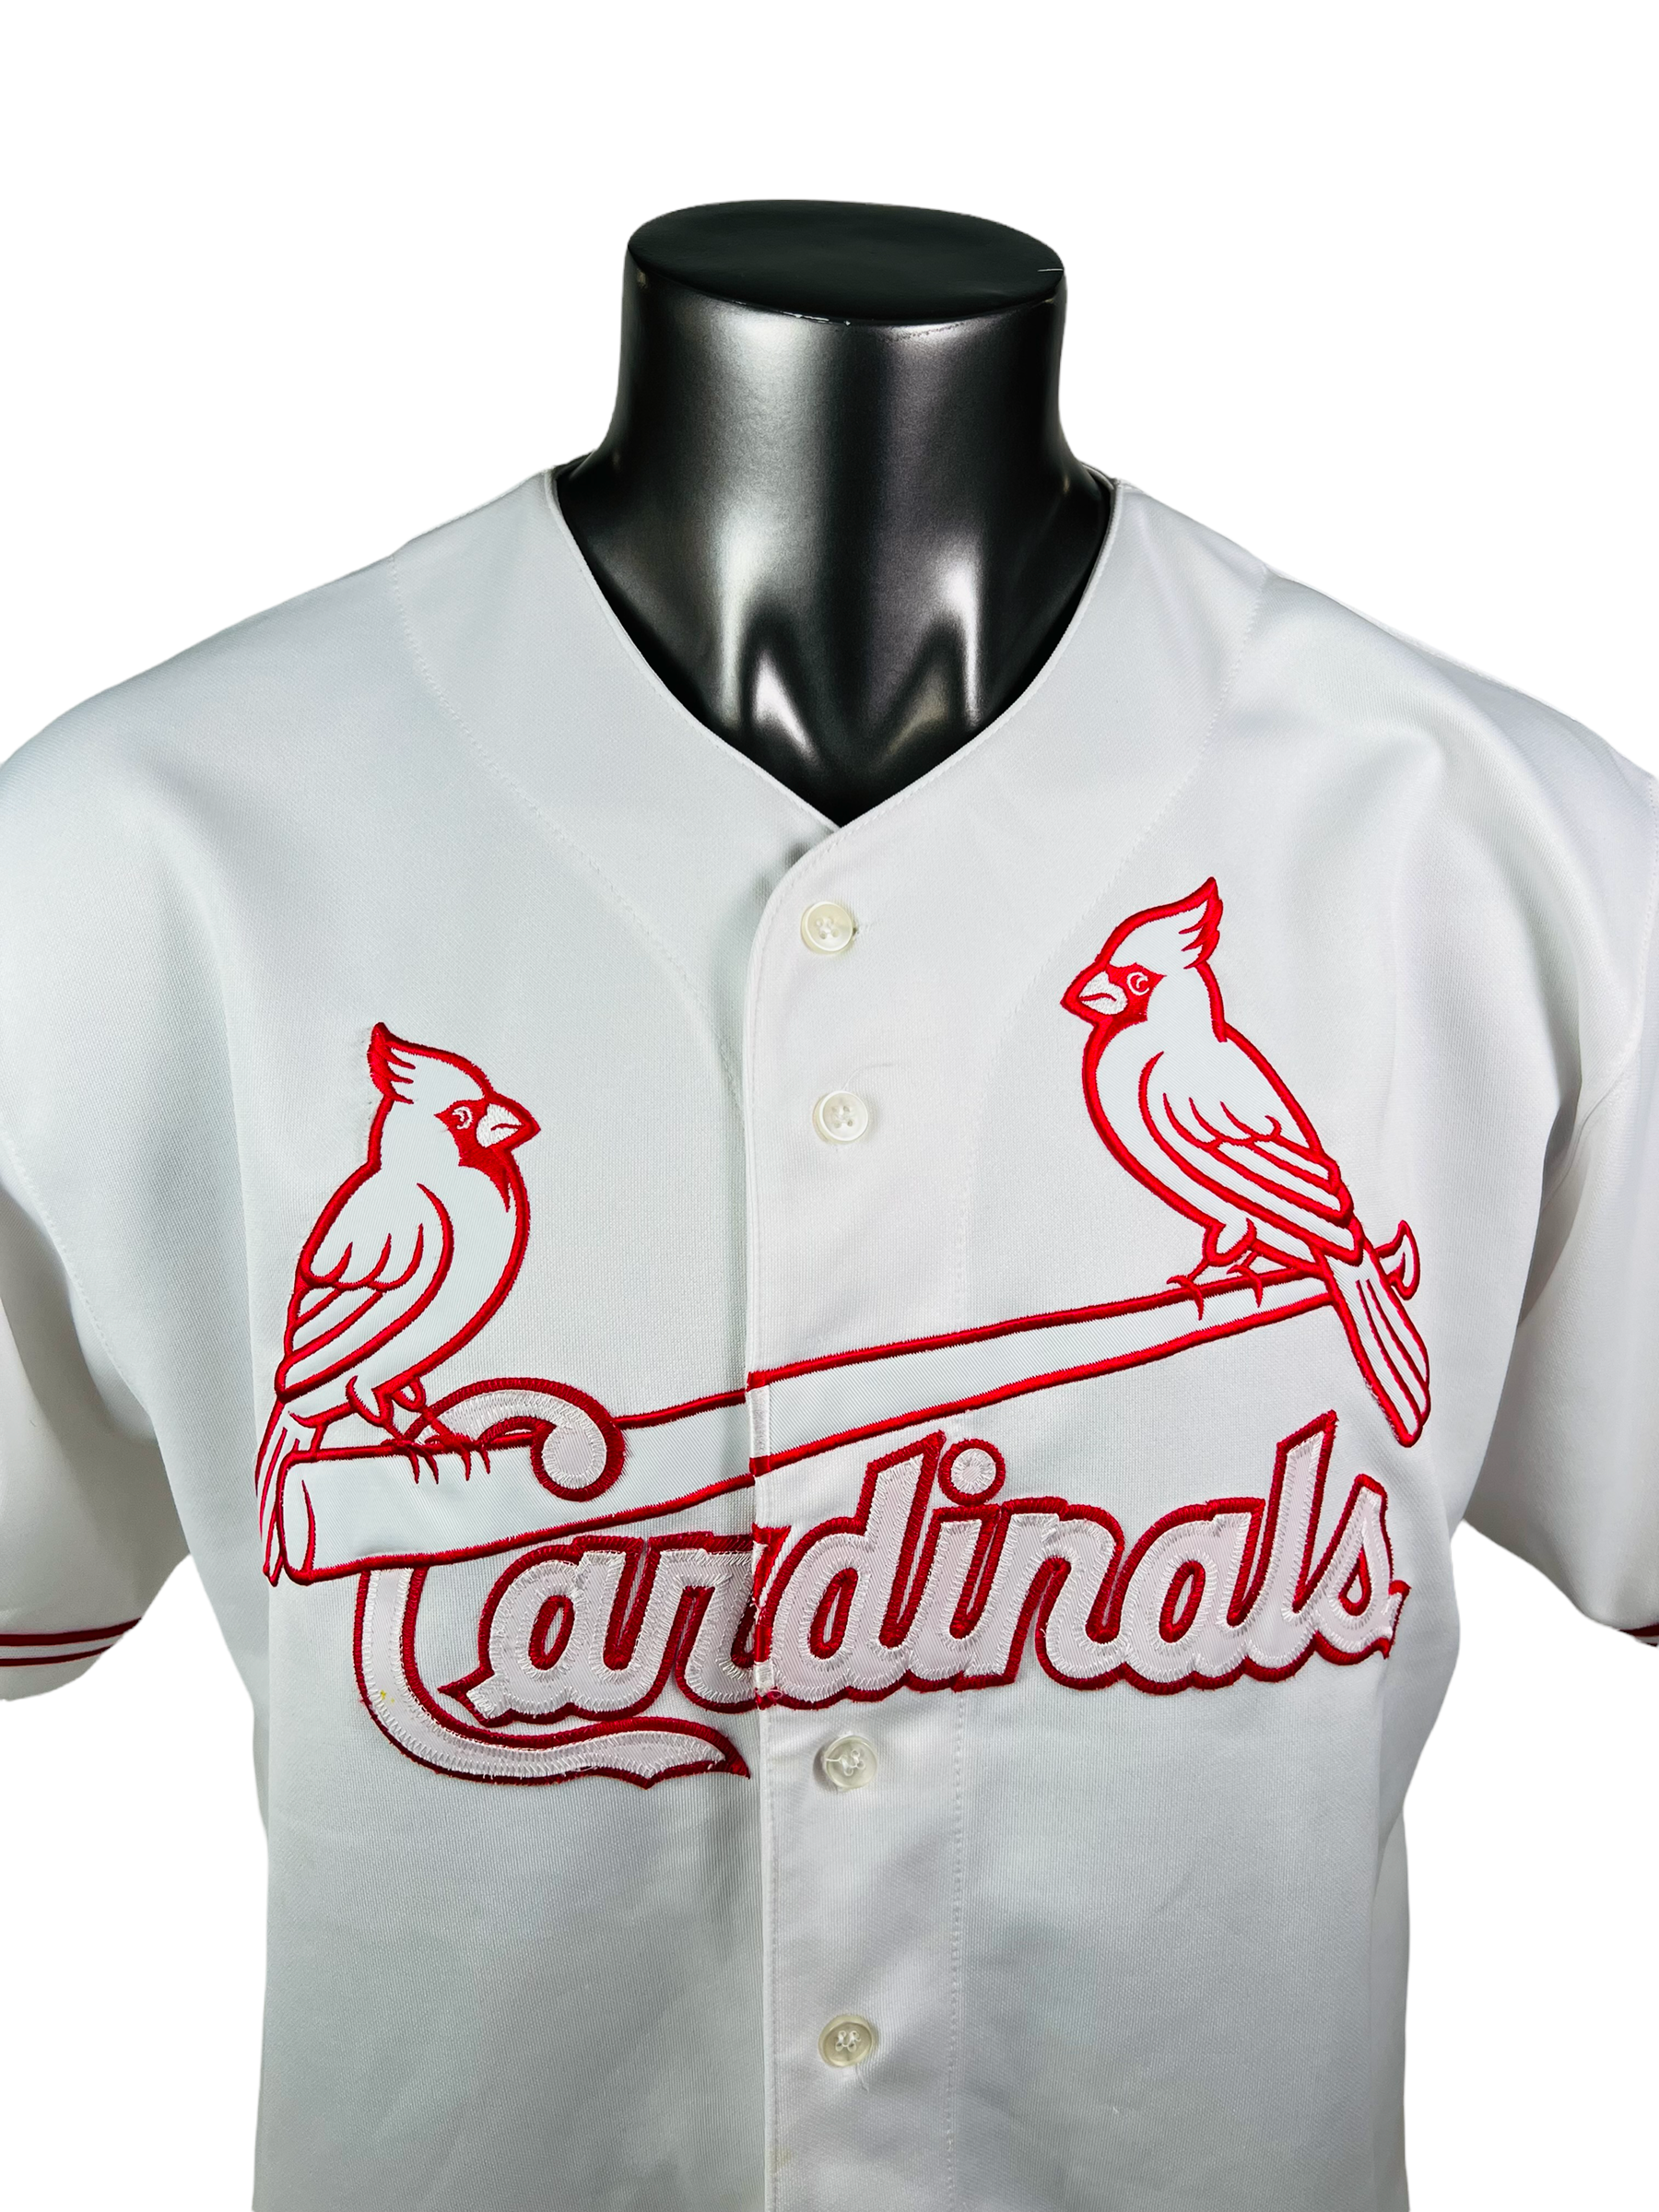 ST. LOUIS CARDINALS VINTAGE 1990'S RUSSELL ATHLETIC JERSEY ADULT